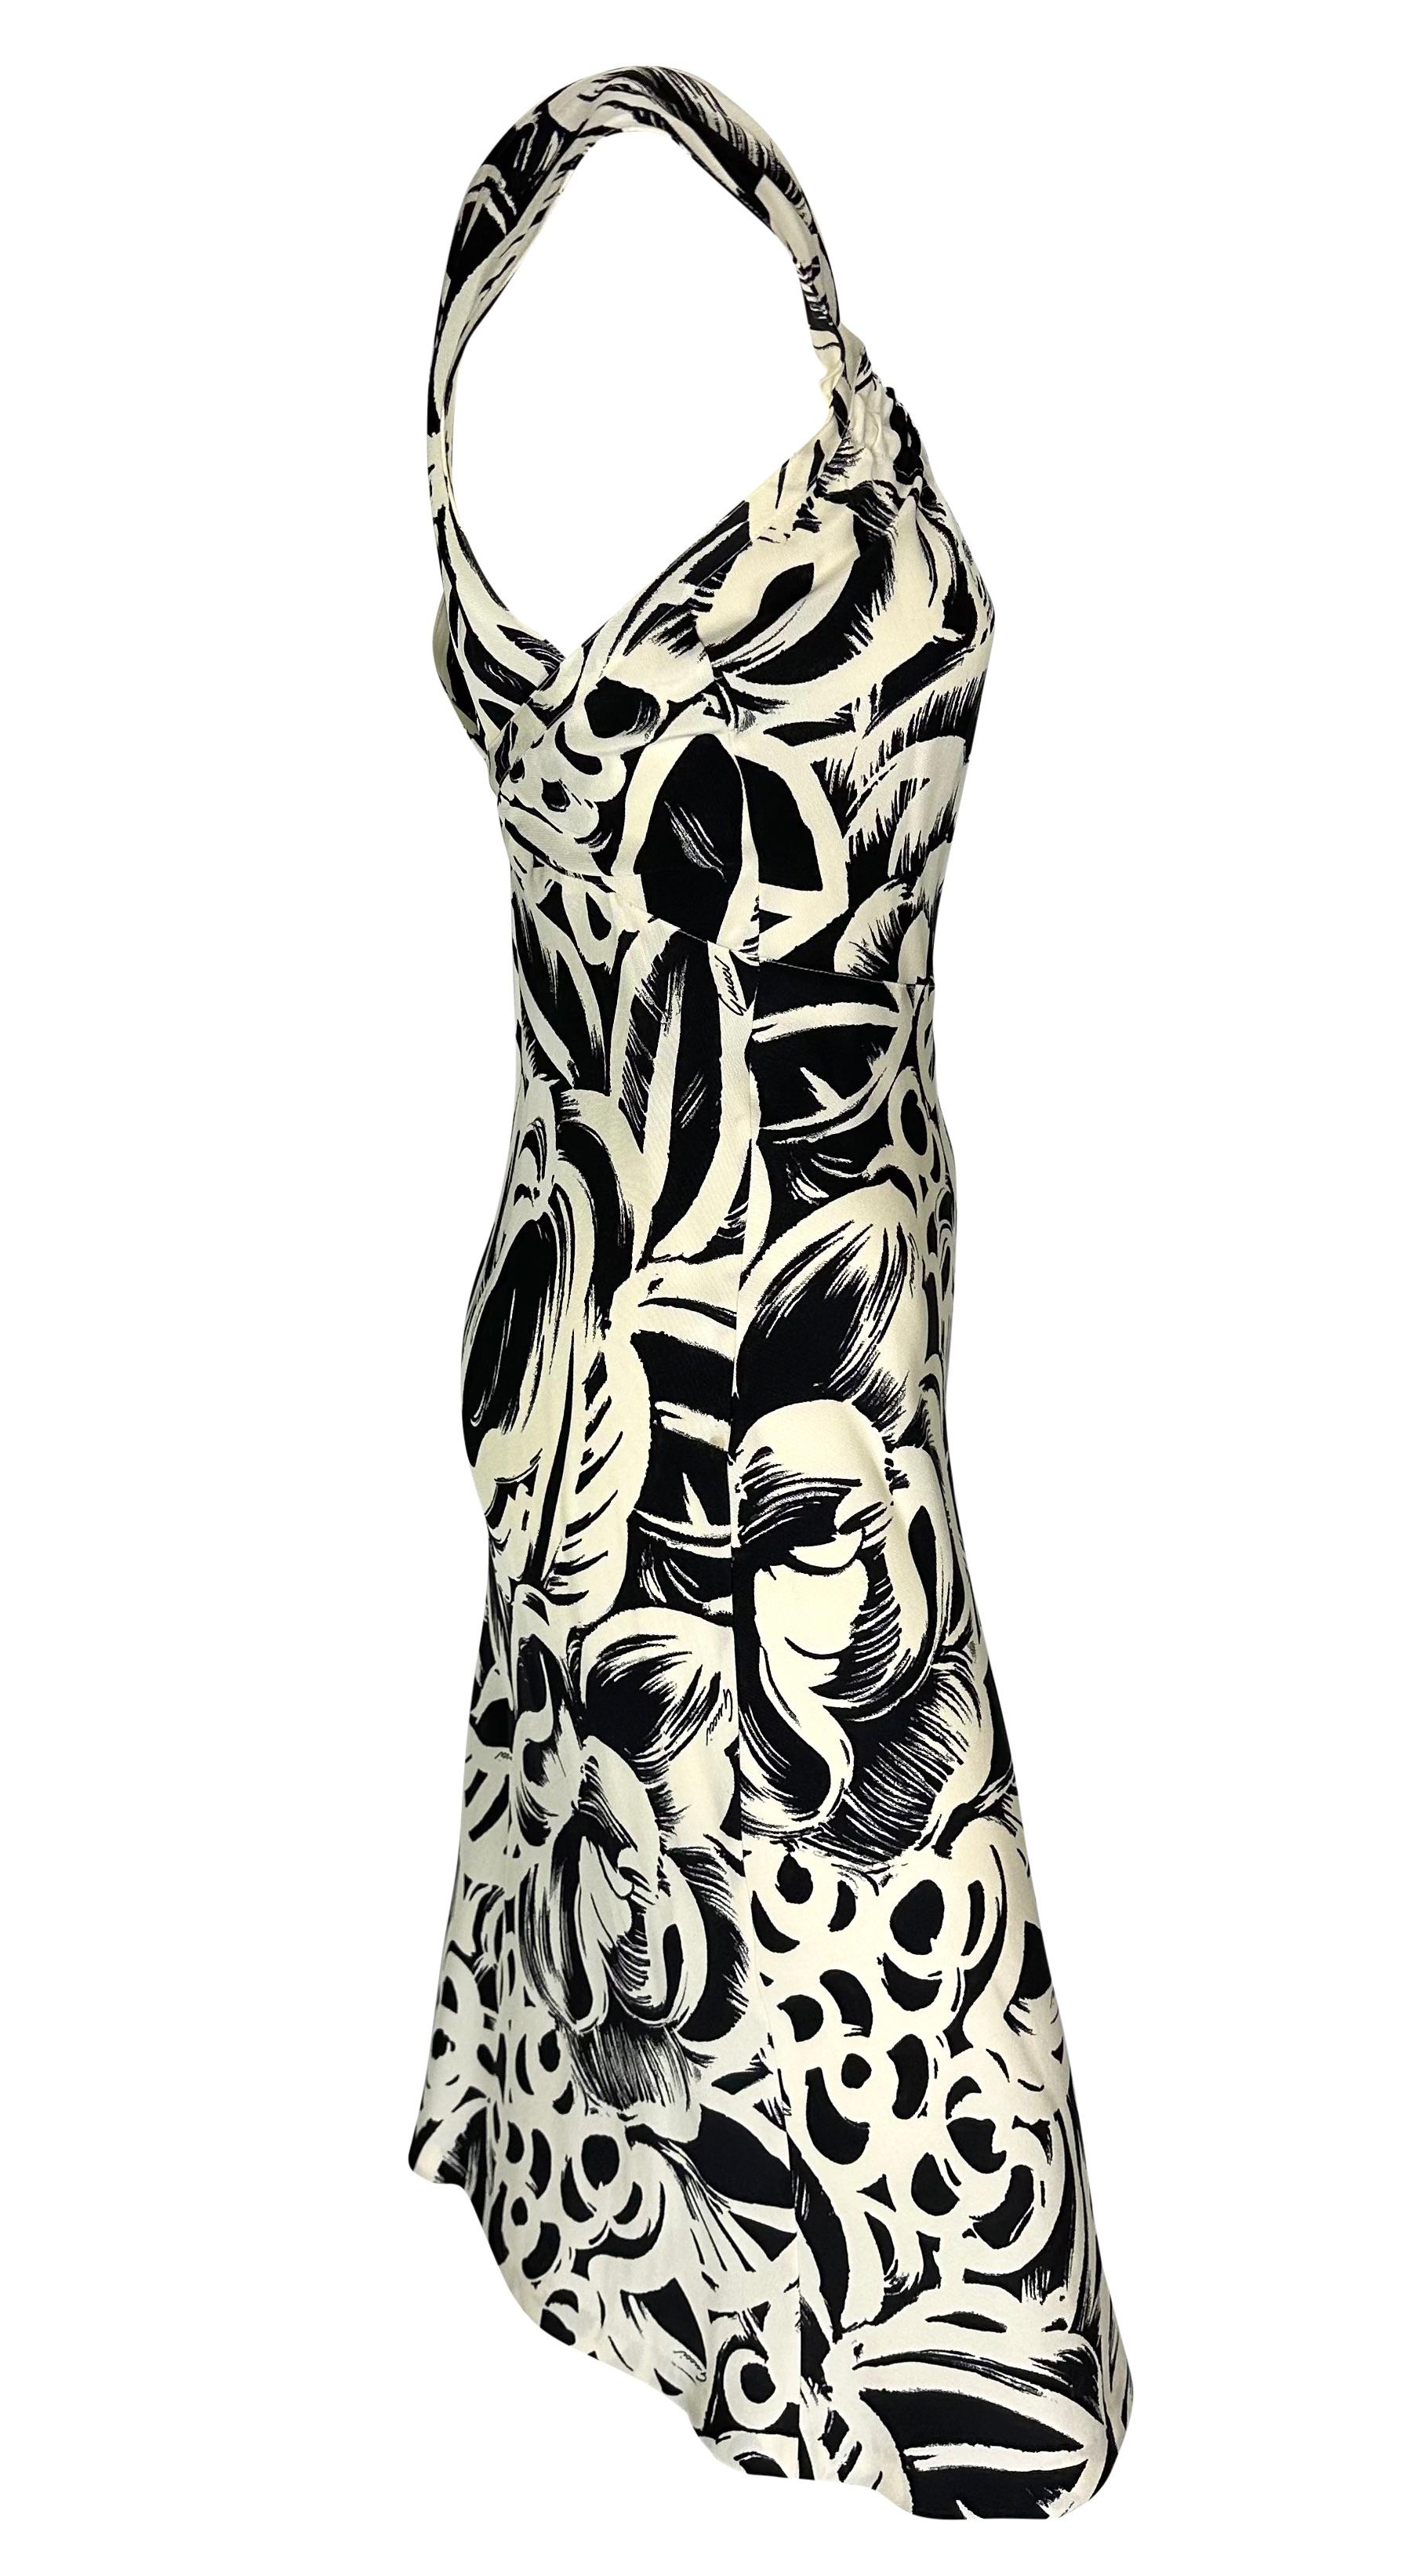 2002 Gucci by Tom Ford Abstract Black White Floral Logo Print Silk Dress For Sale 2